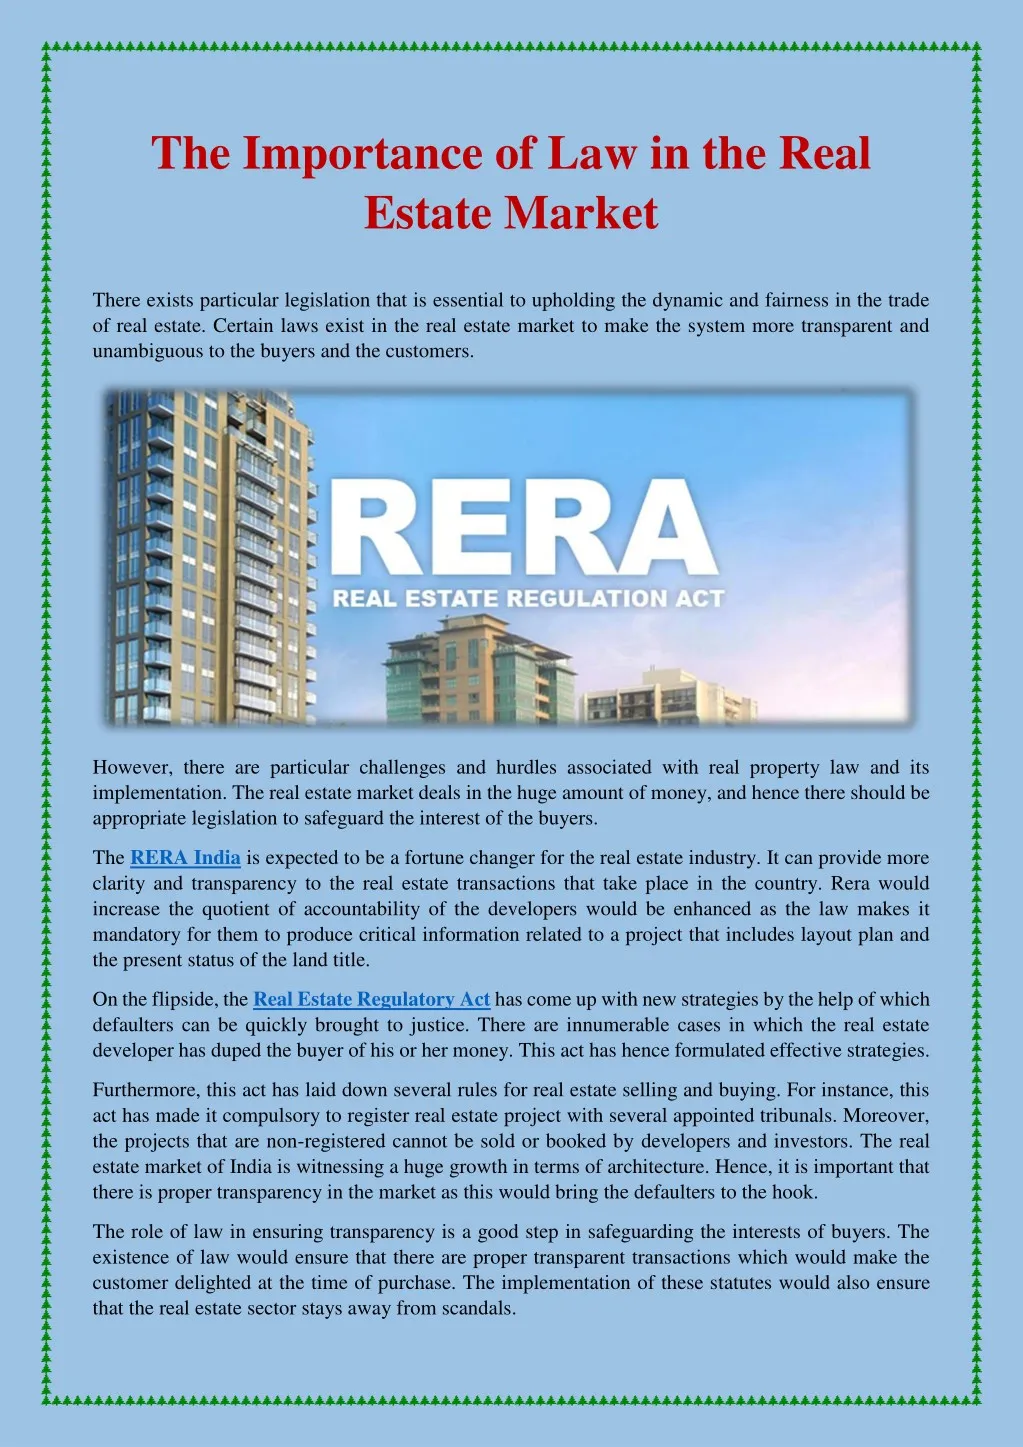 the importance of law in the real estate market